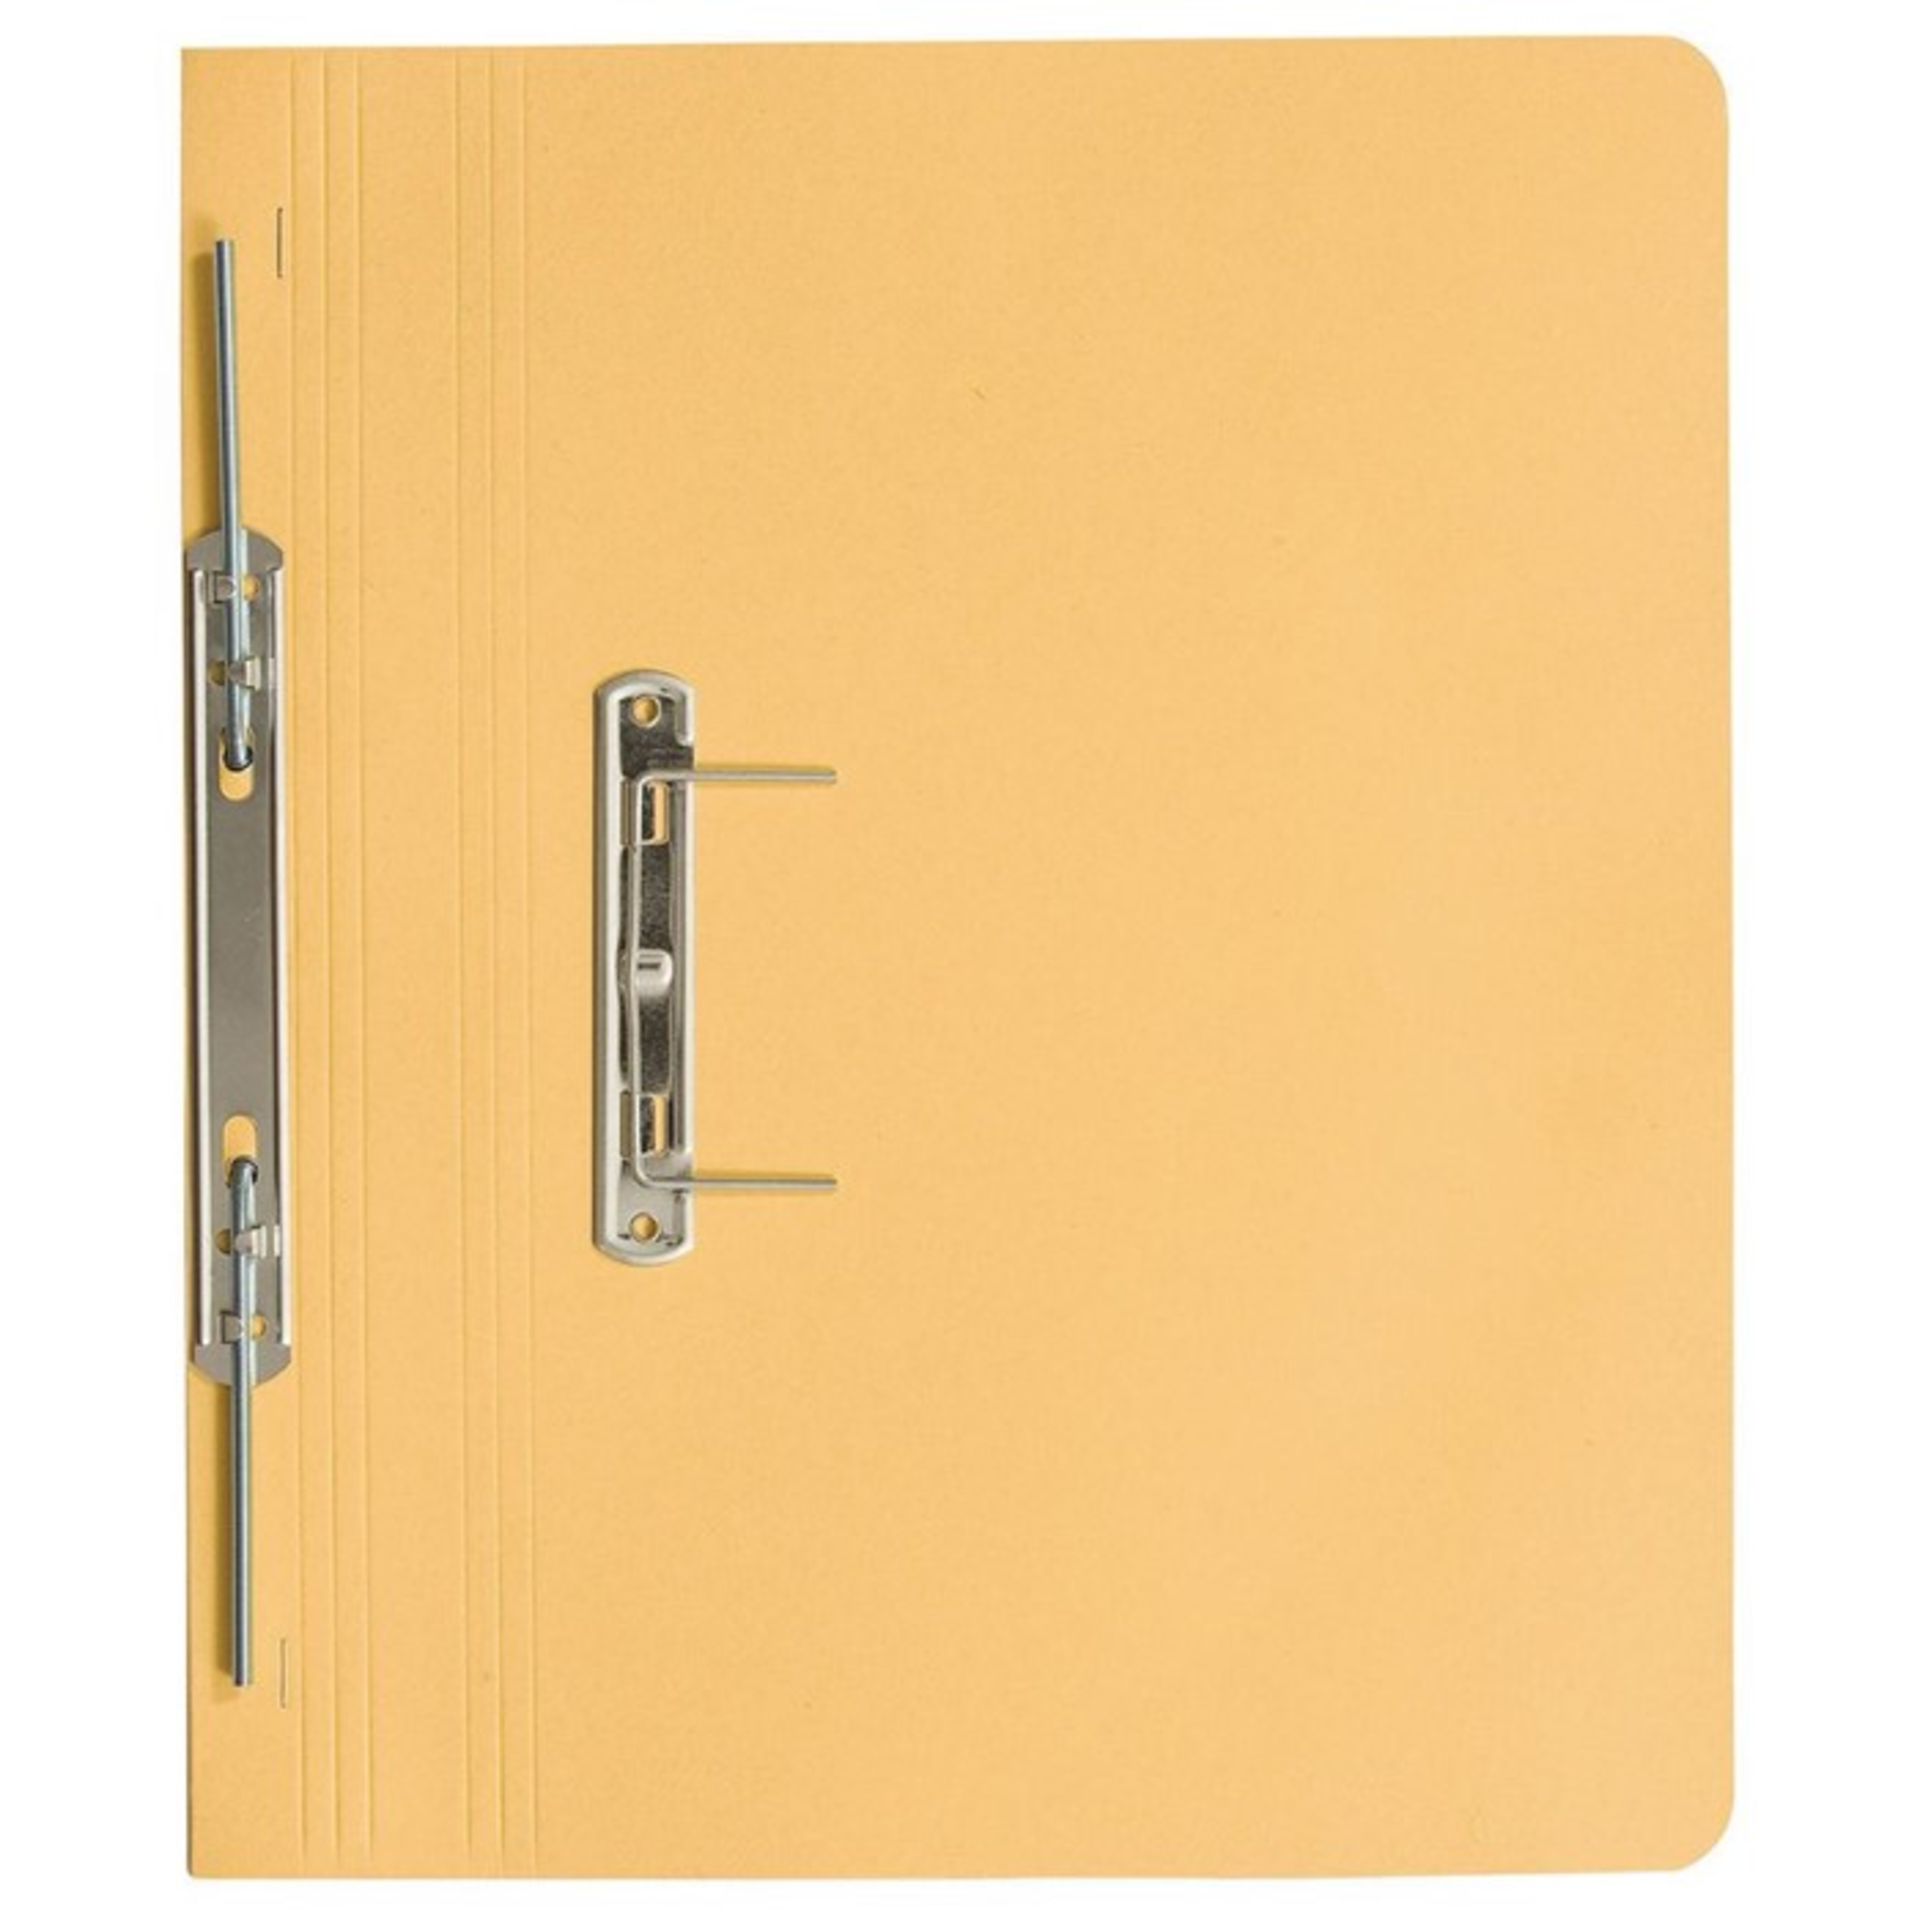 1 BOX OF 50 GUILDHALL POCKET SPIRAL FILE IN ORANGE / RRP £86.49 (VIEWING HIGHLY RECOMMENDED)